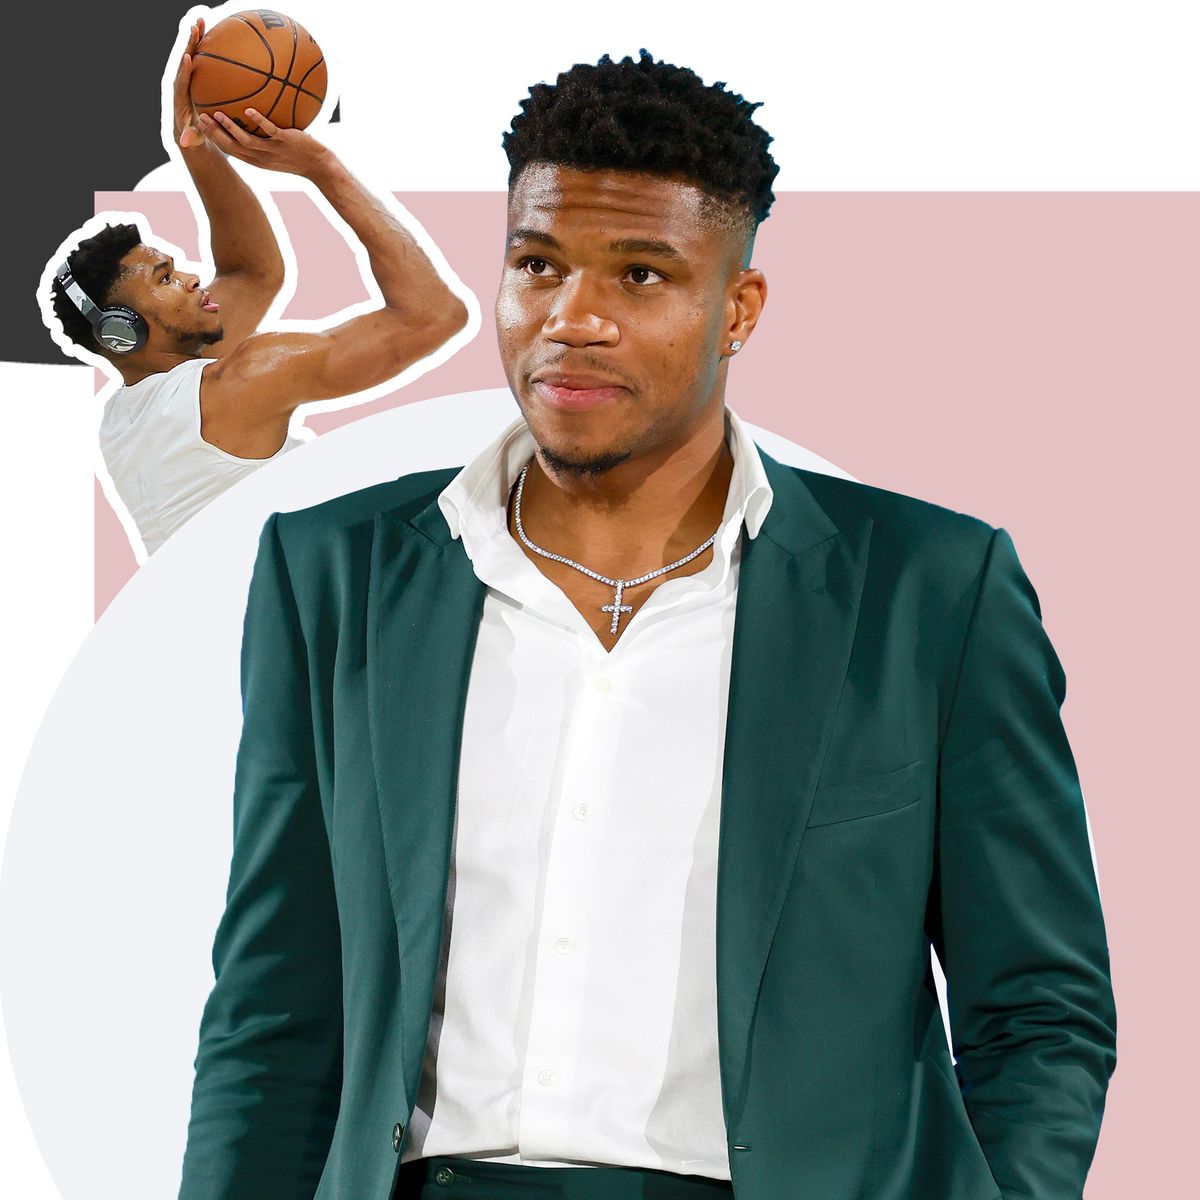 How many brothers does Giannis Antetokounmpo have and how many are in the  NBA?